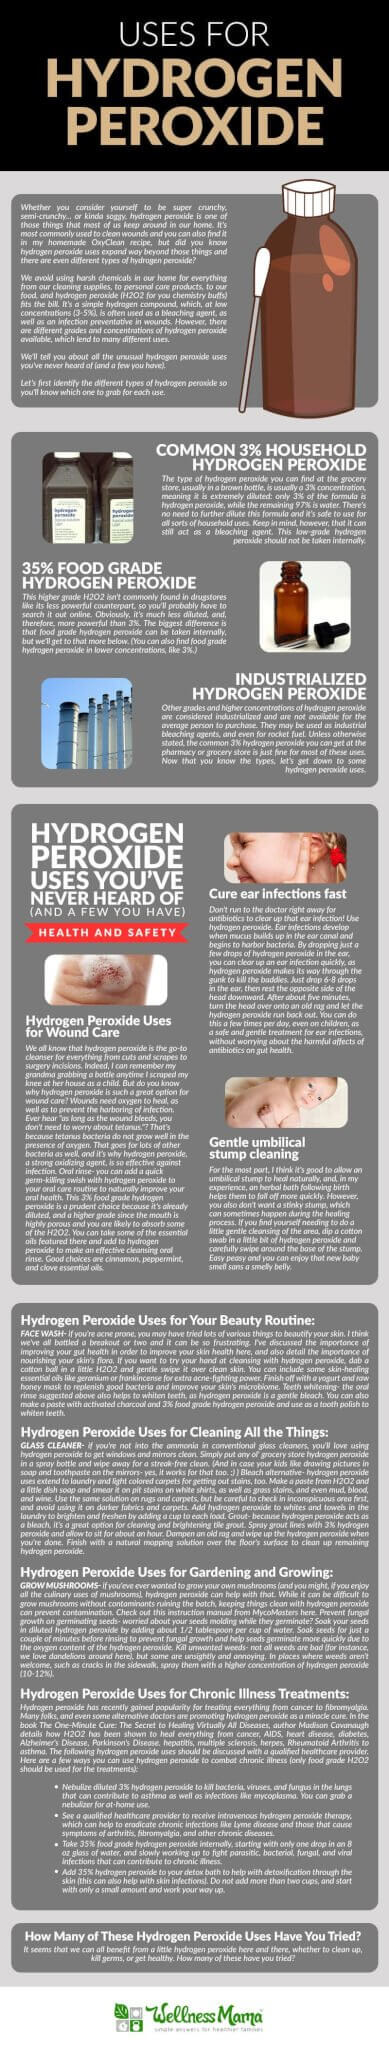 Hydrogen Peroxide Benefits & Uses for Home & Beauty ...